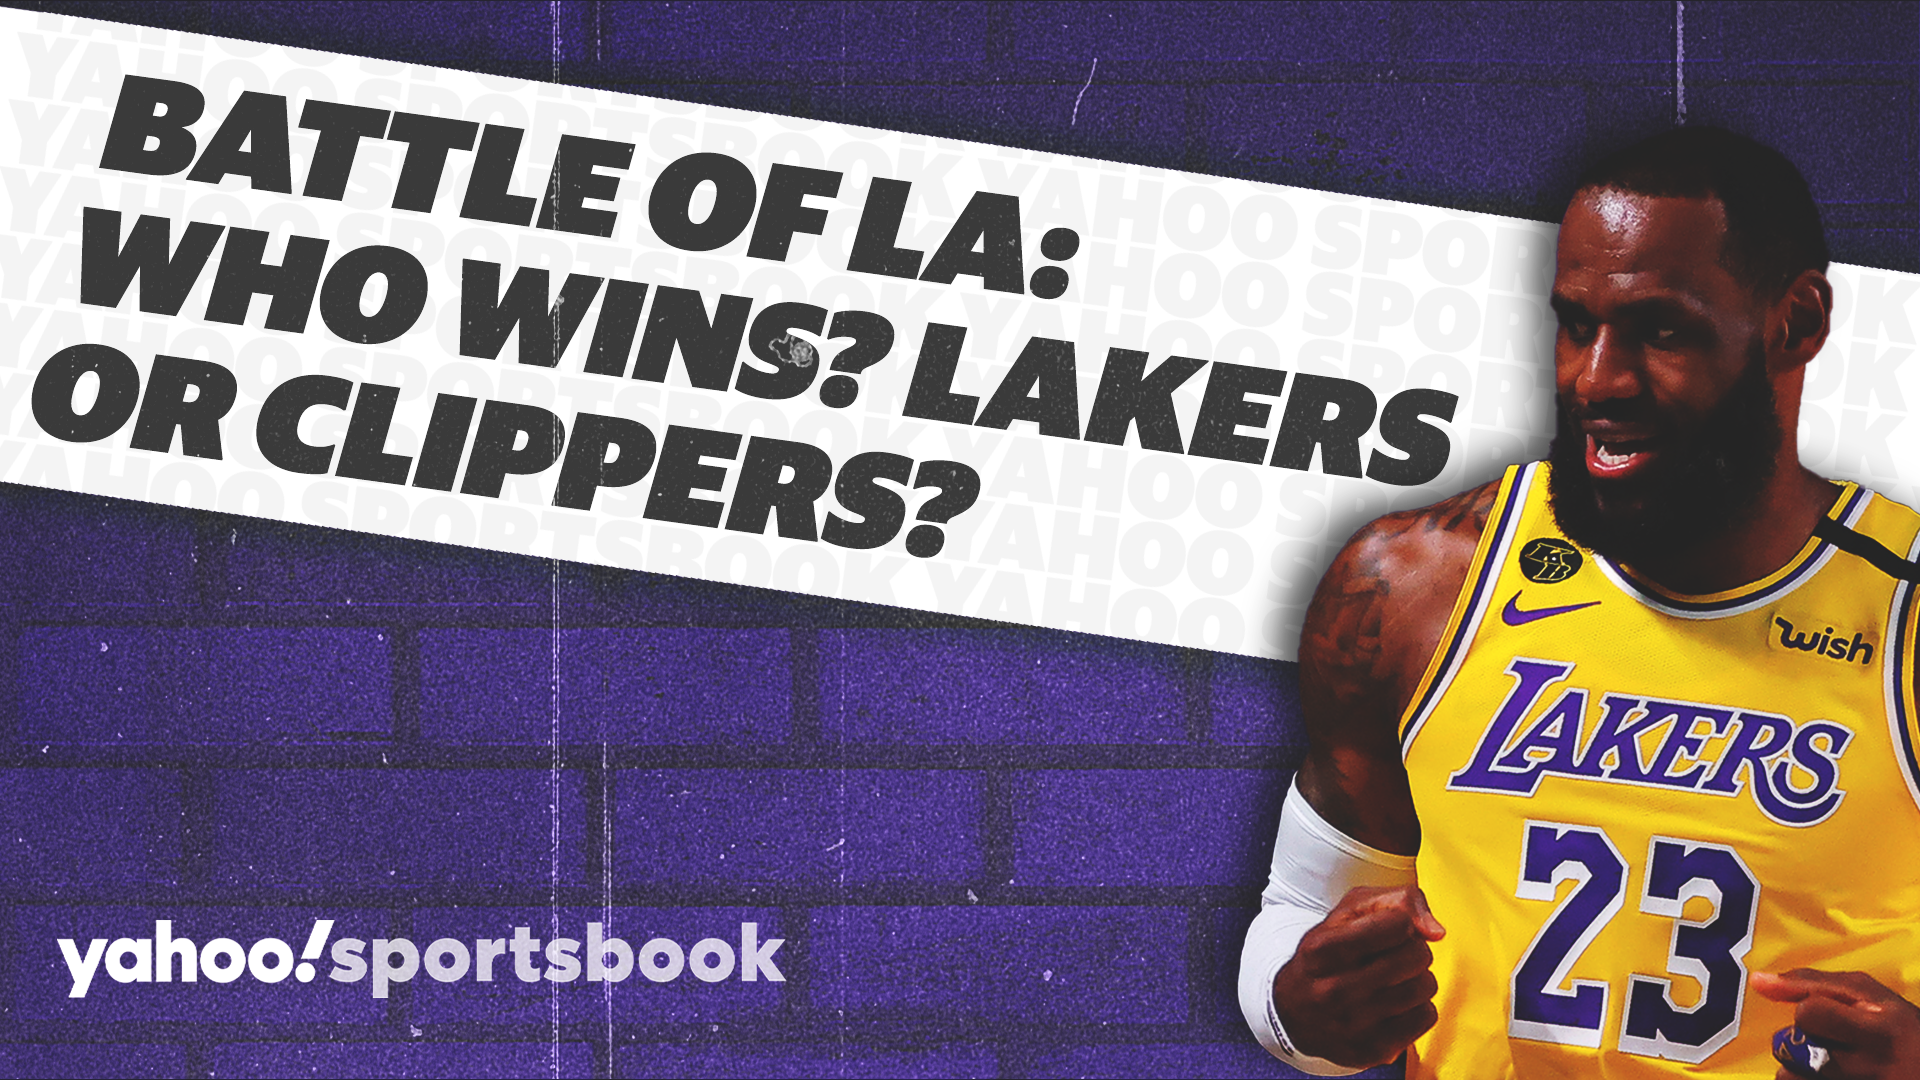 Los Angeles Lakers News, Videos, Schedule, Roster, Stats - Yahoo Sports